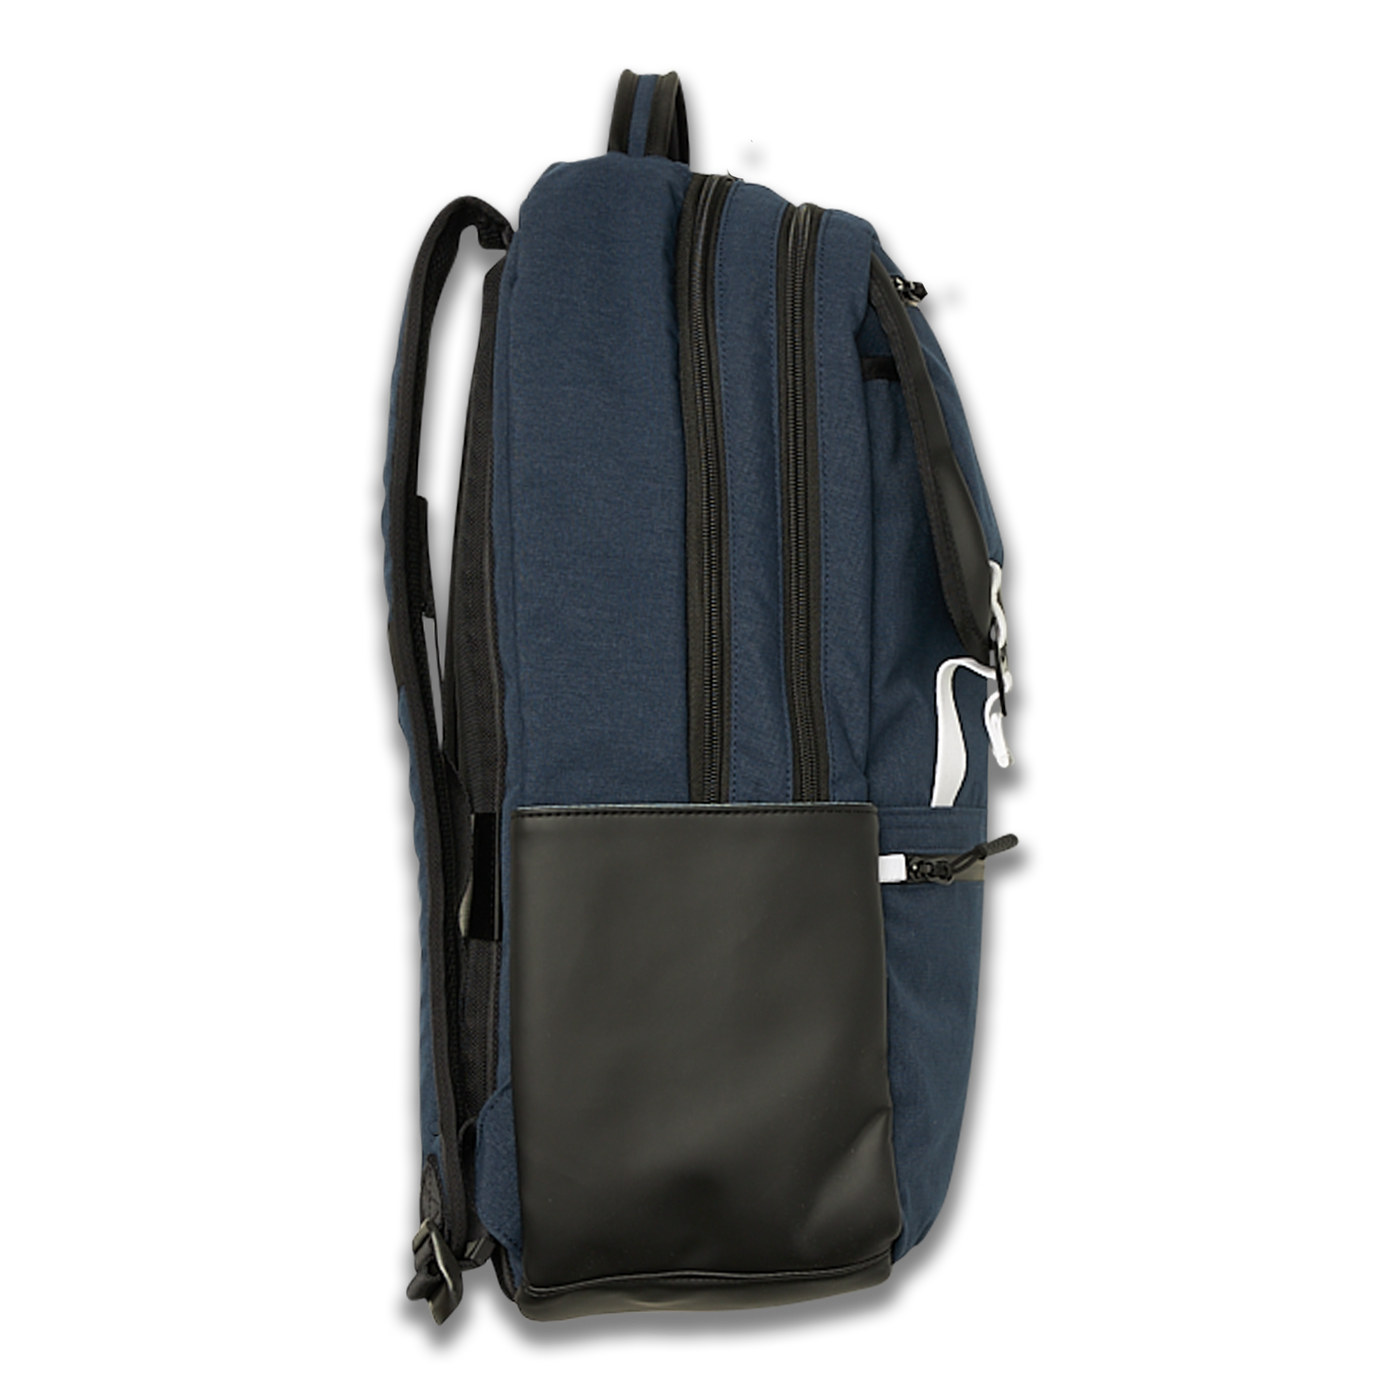 A2 Backpack R - Navy